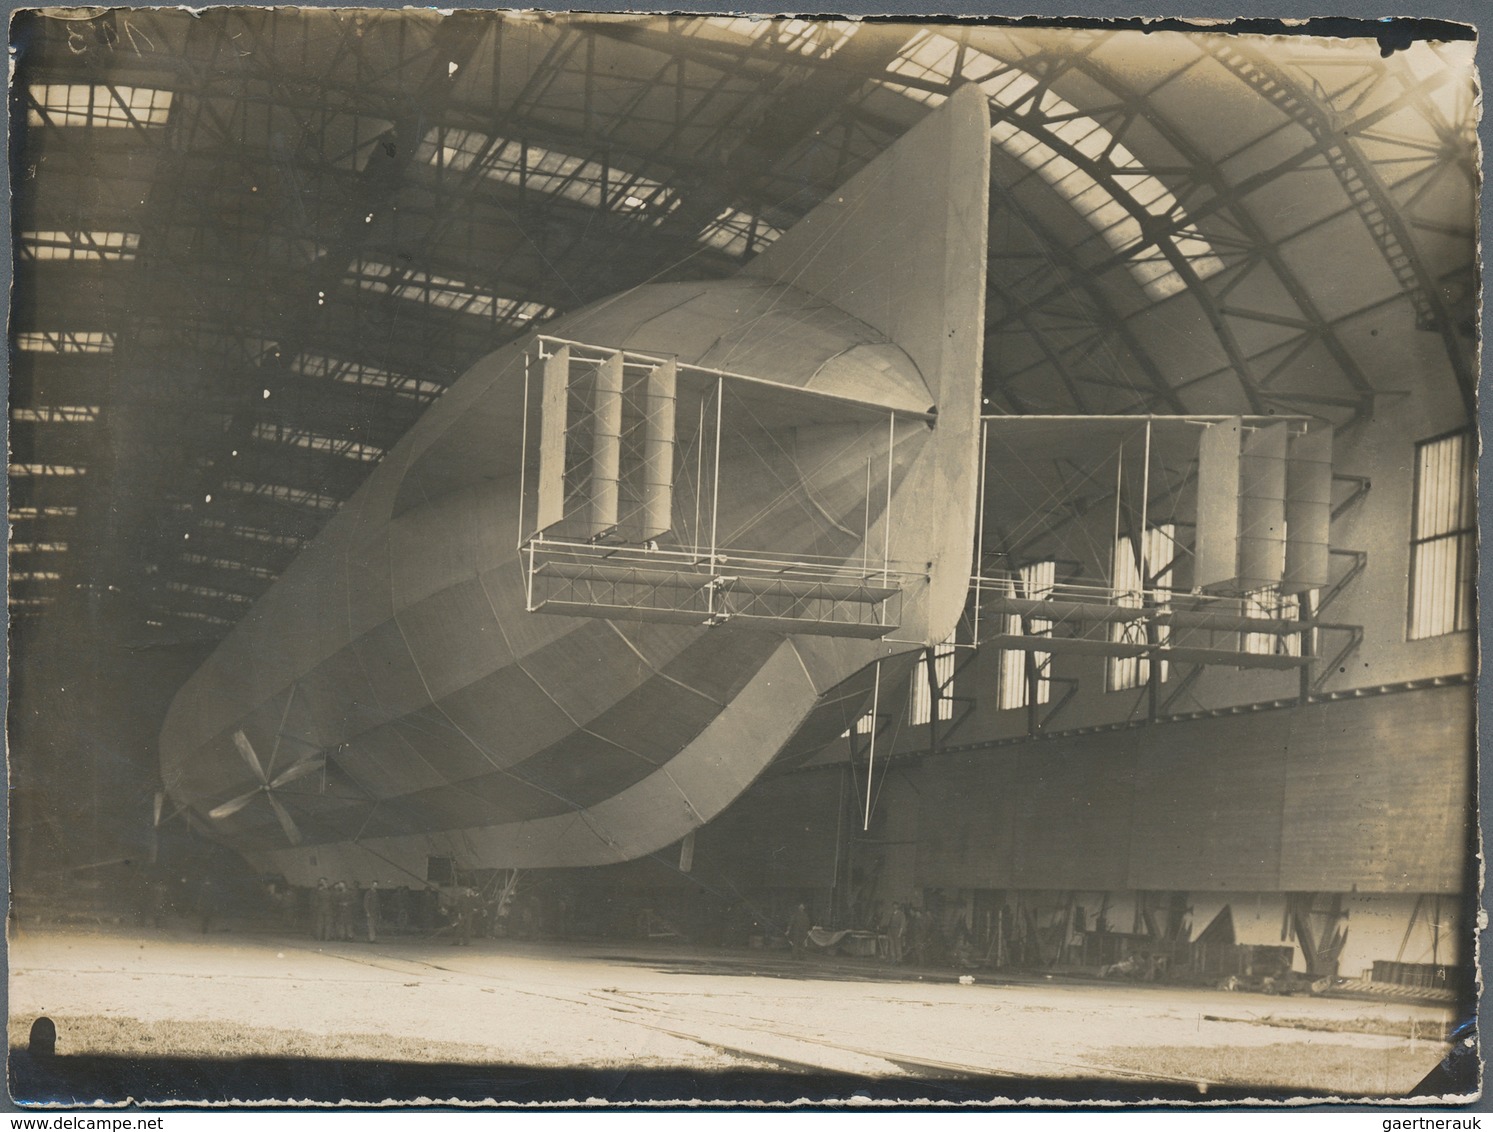 Ansichtskarten: Motive / Thematics: ZEPPELIN: Over 140 Zeppelin postcards, mostly Real Photos with t